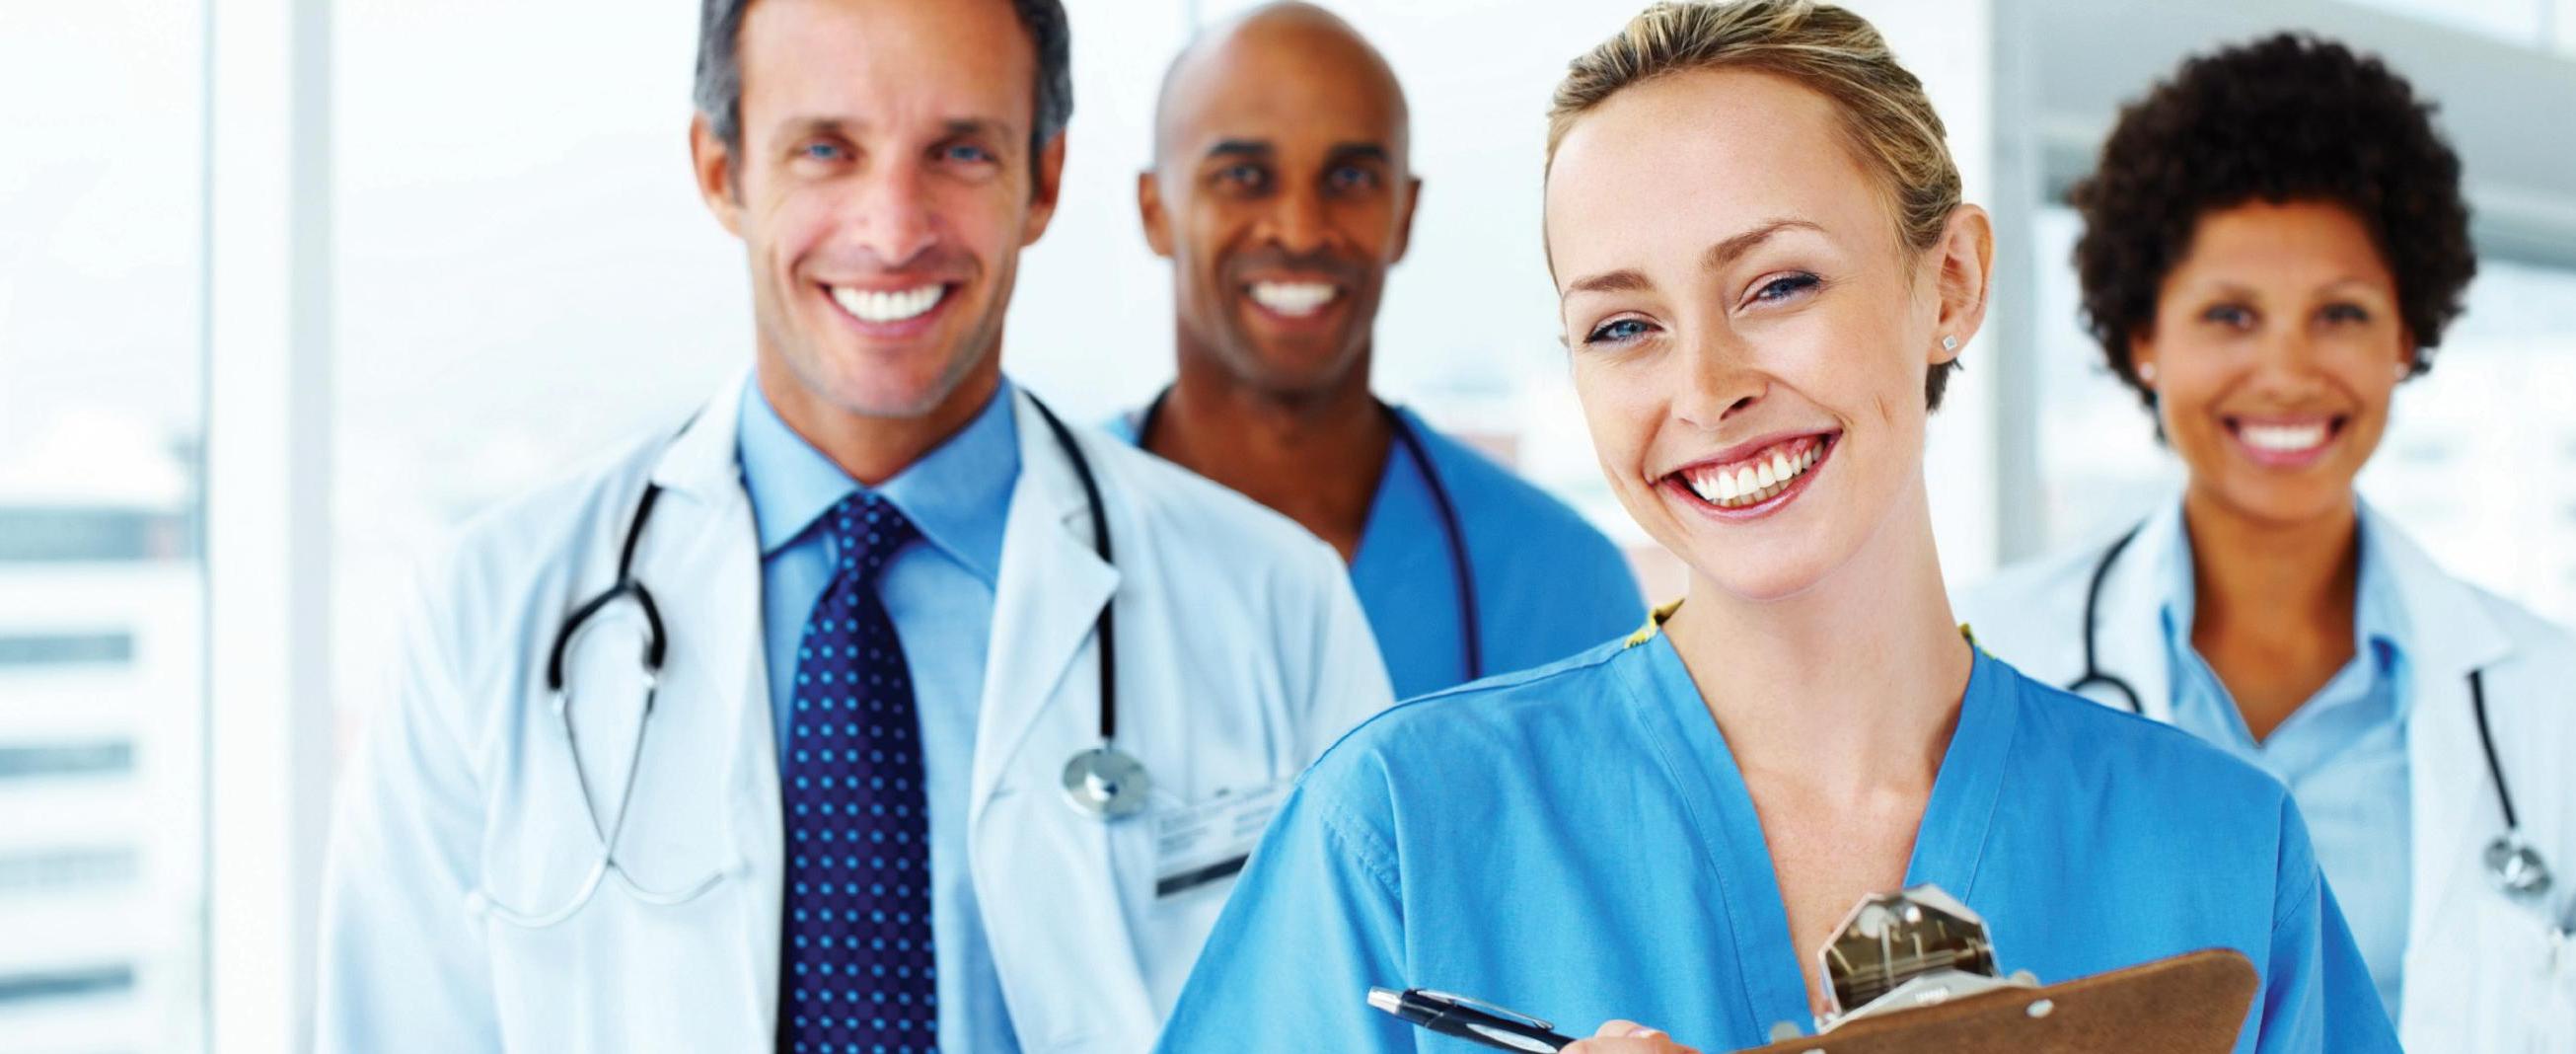 medical team | Accident Care and Treatment Center